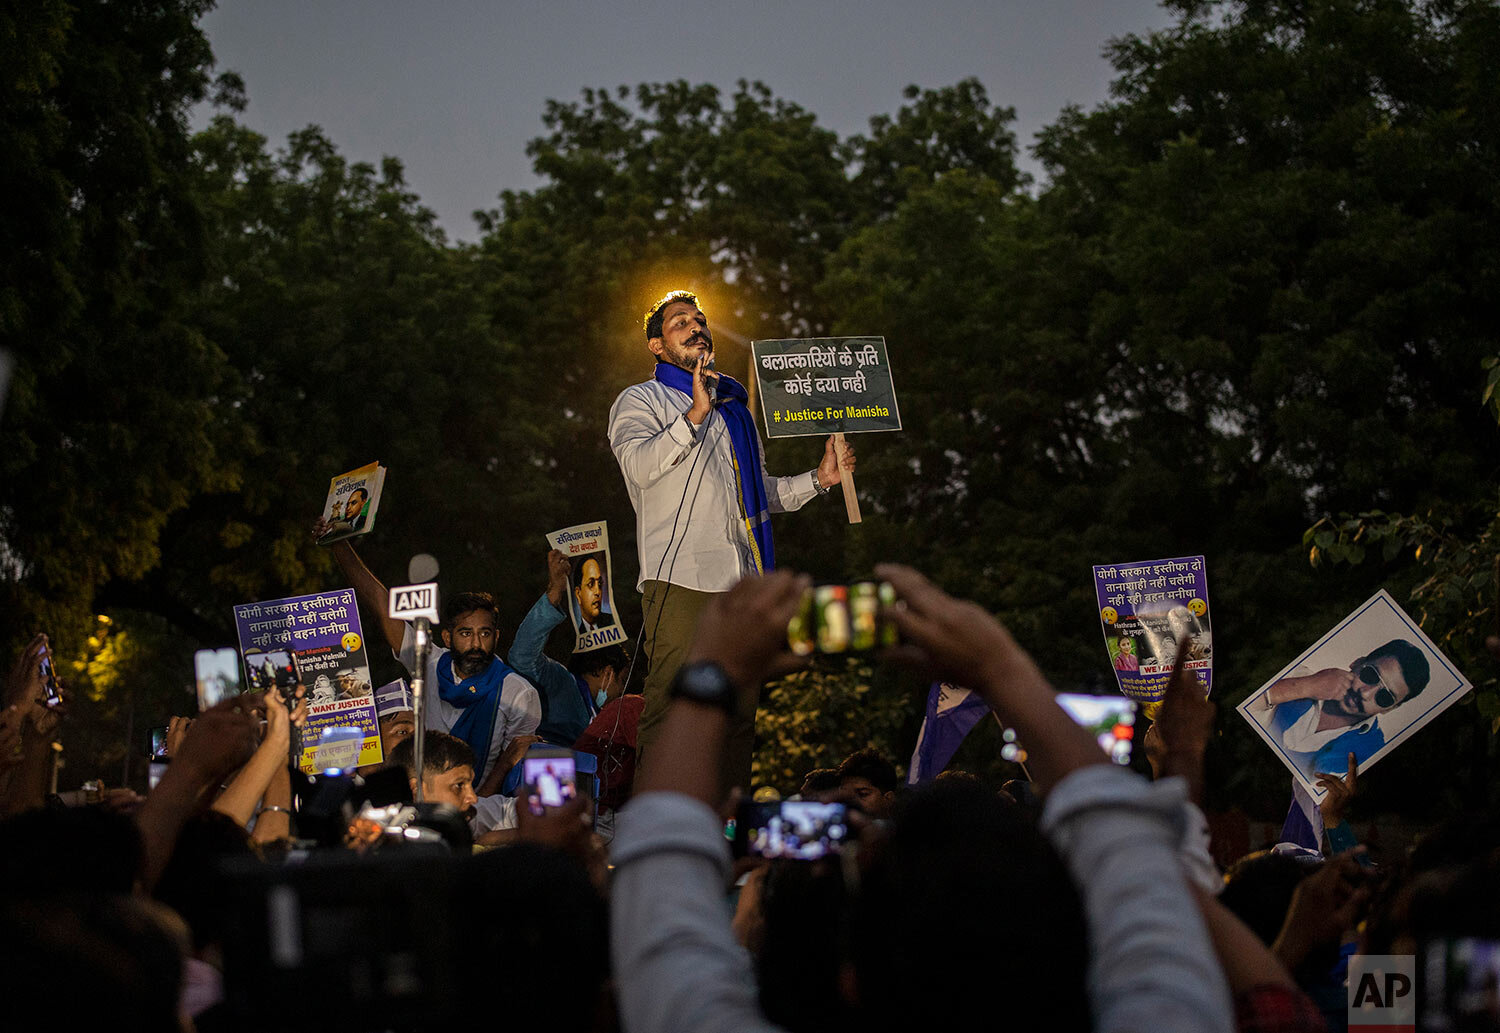  Chandrashekhar Azad, leader of the Bhim Army, a political party of Dalits who represent the Hinduism's lowest caste, speaks during a protest against the gang rape and killing of a woman in India's northern state of Uttar Pradesh, in New Delhi, India